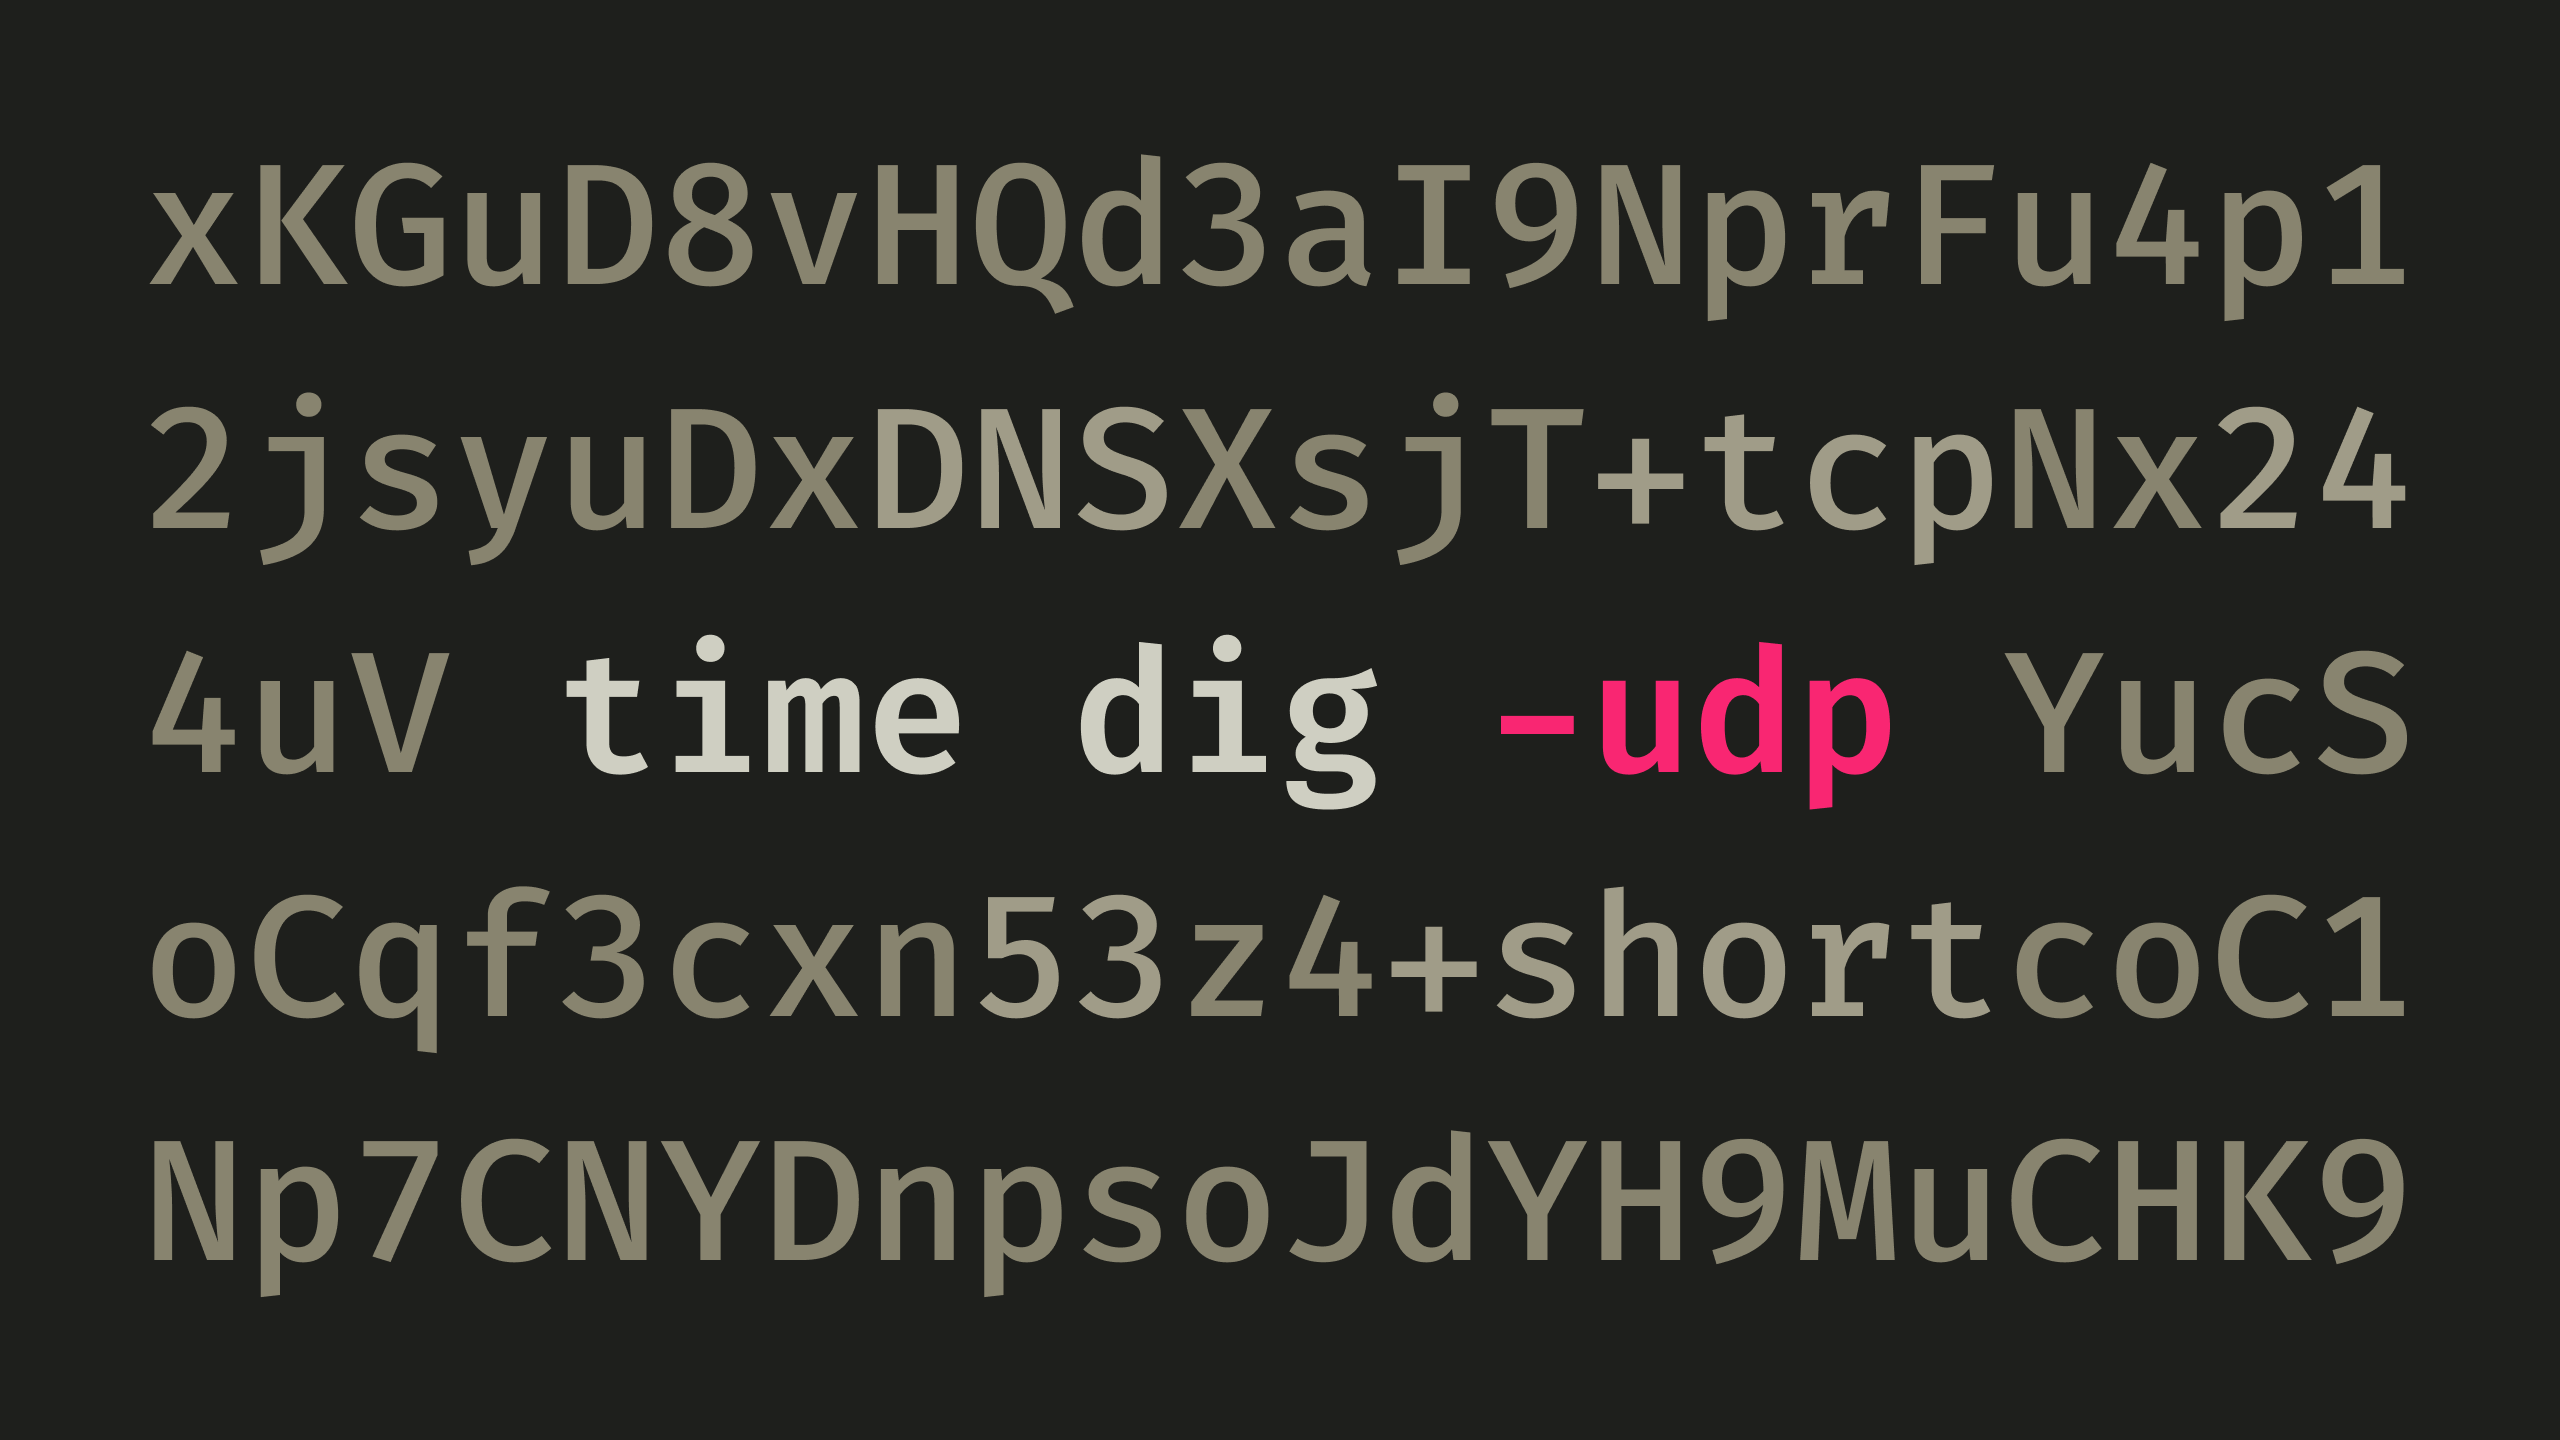 The text "time dig -udp" surrounded by random characters.